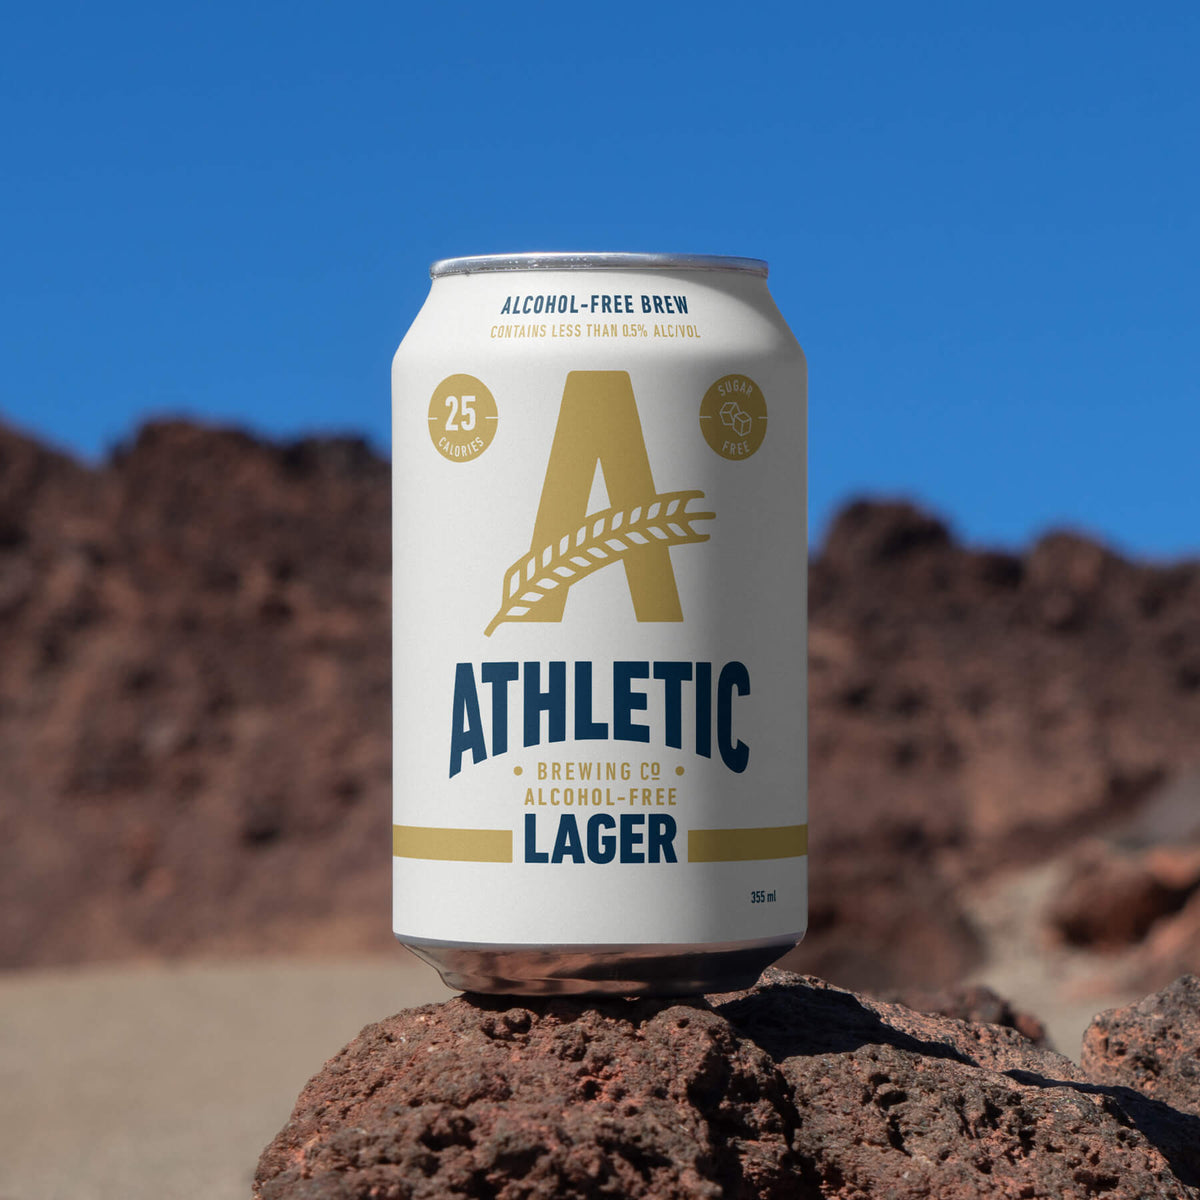 Athletic Lager